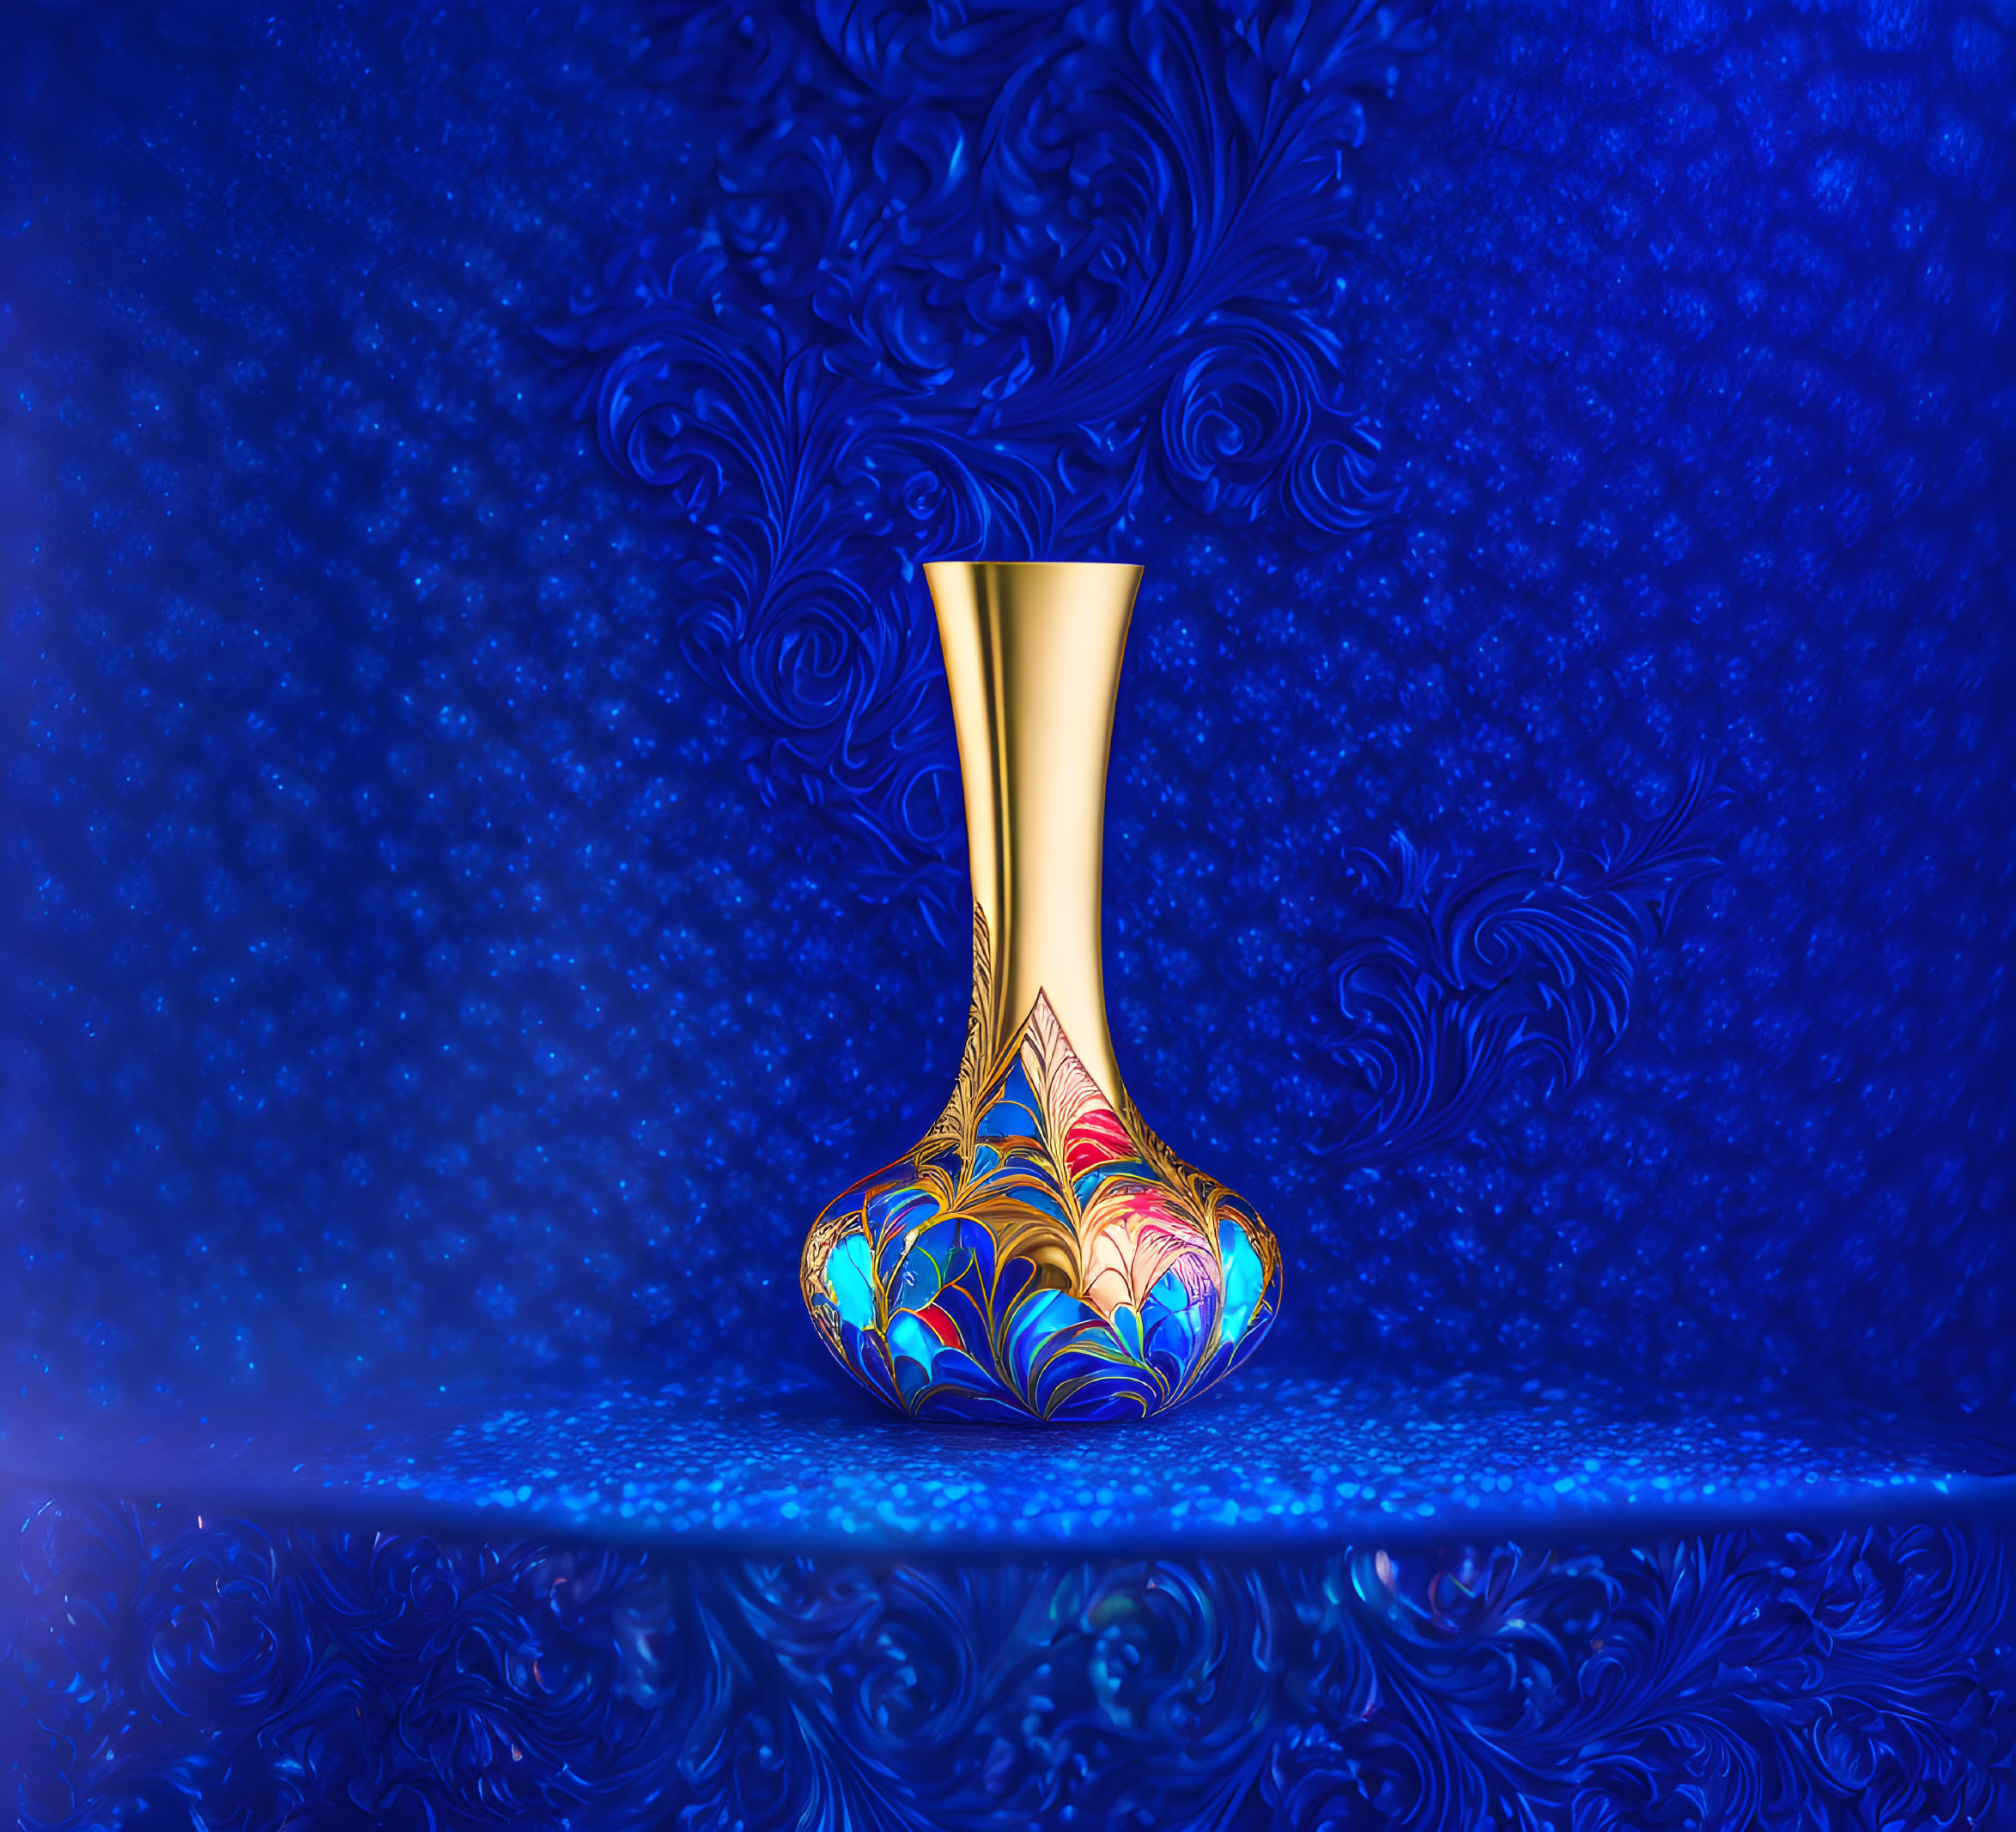 Majestic Blue and Gold Vase